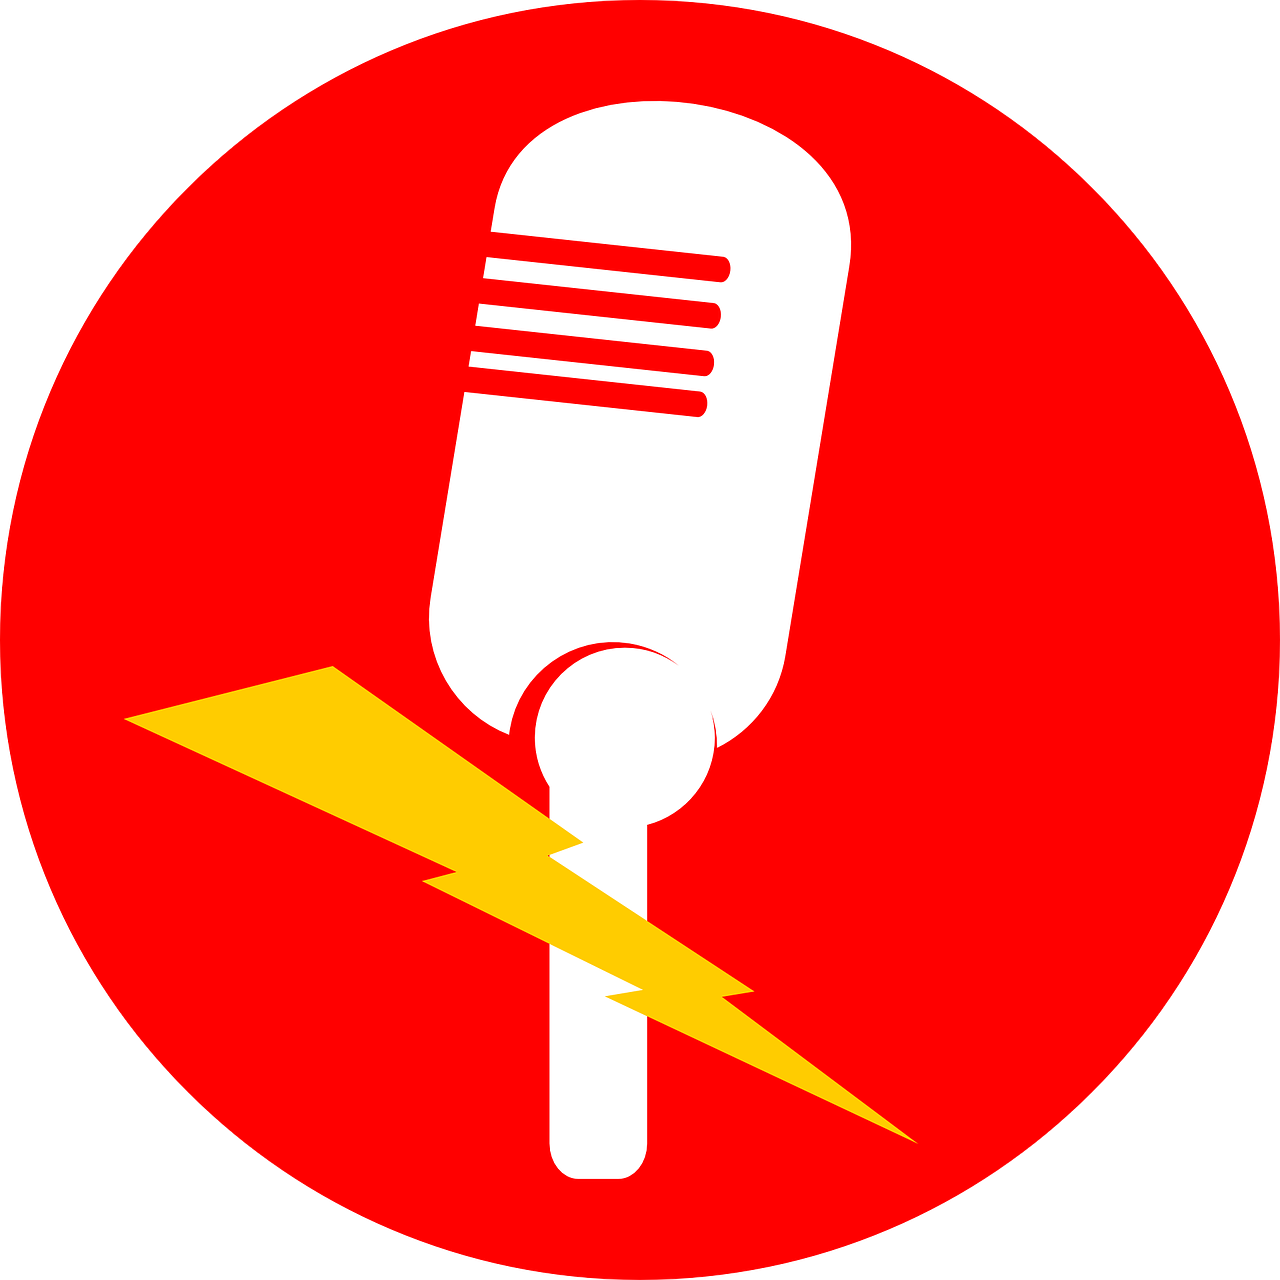 microphone,mic,sound,record,stage,concert,free vector graphics,free pictures, free photos, free images, royalty free, free illustrations, public domain